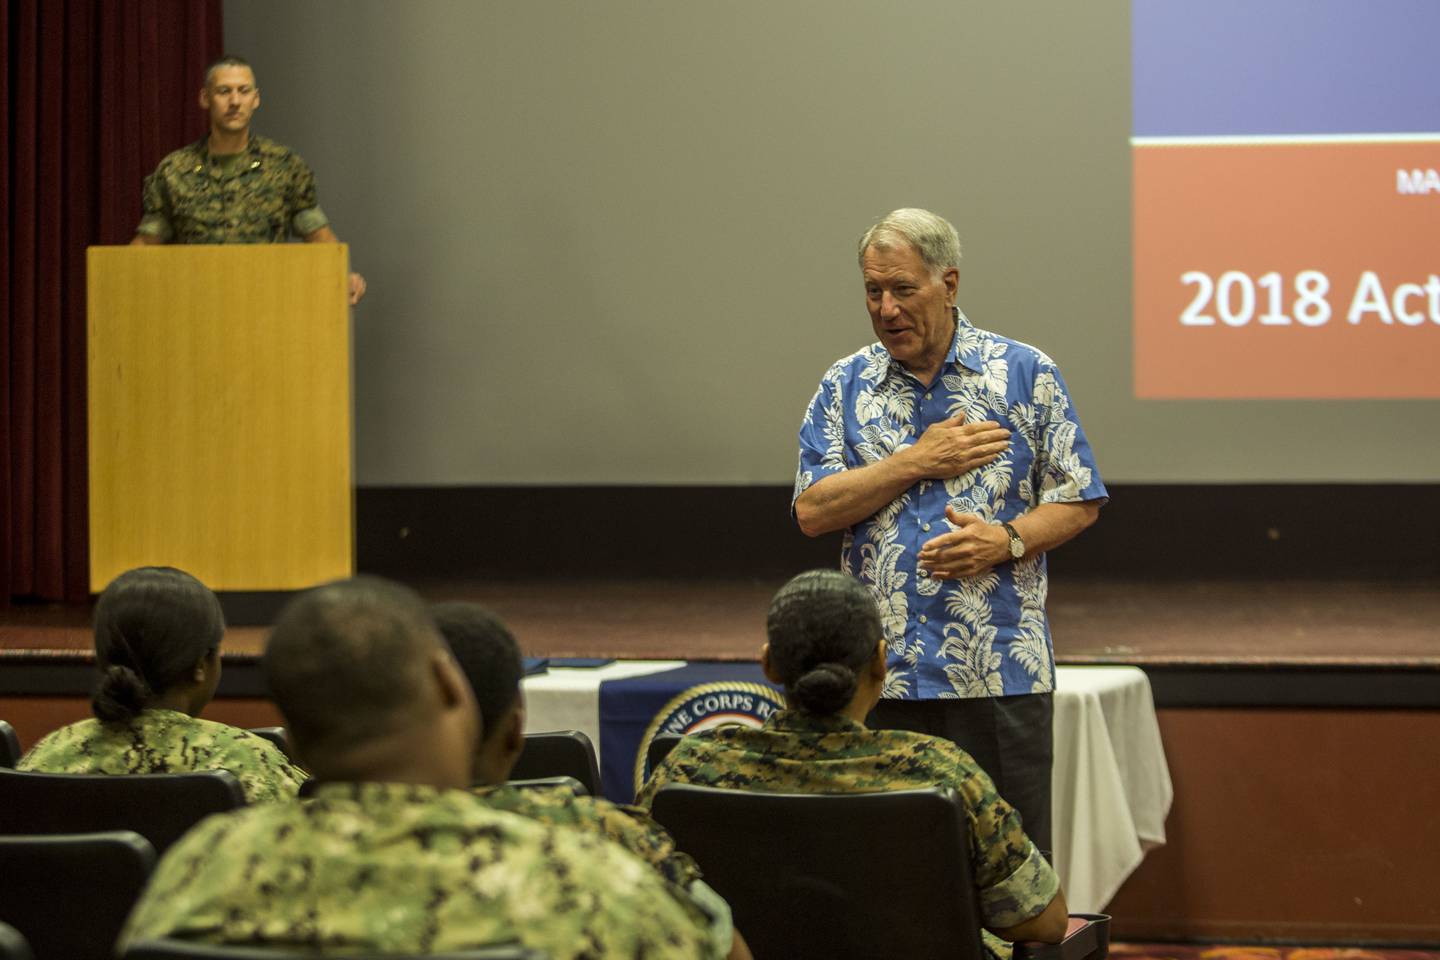 Retired Navy Adm. Steve Abbot, the president of Navy-Marine Corps Relief Society, speaks to service members and families during an Active Duty Fund Drive award ceremony at the base theater at Marine Corps Base Hawaii in 2018.